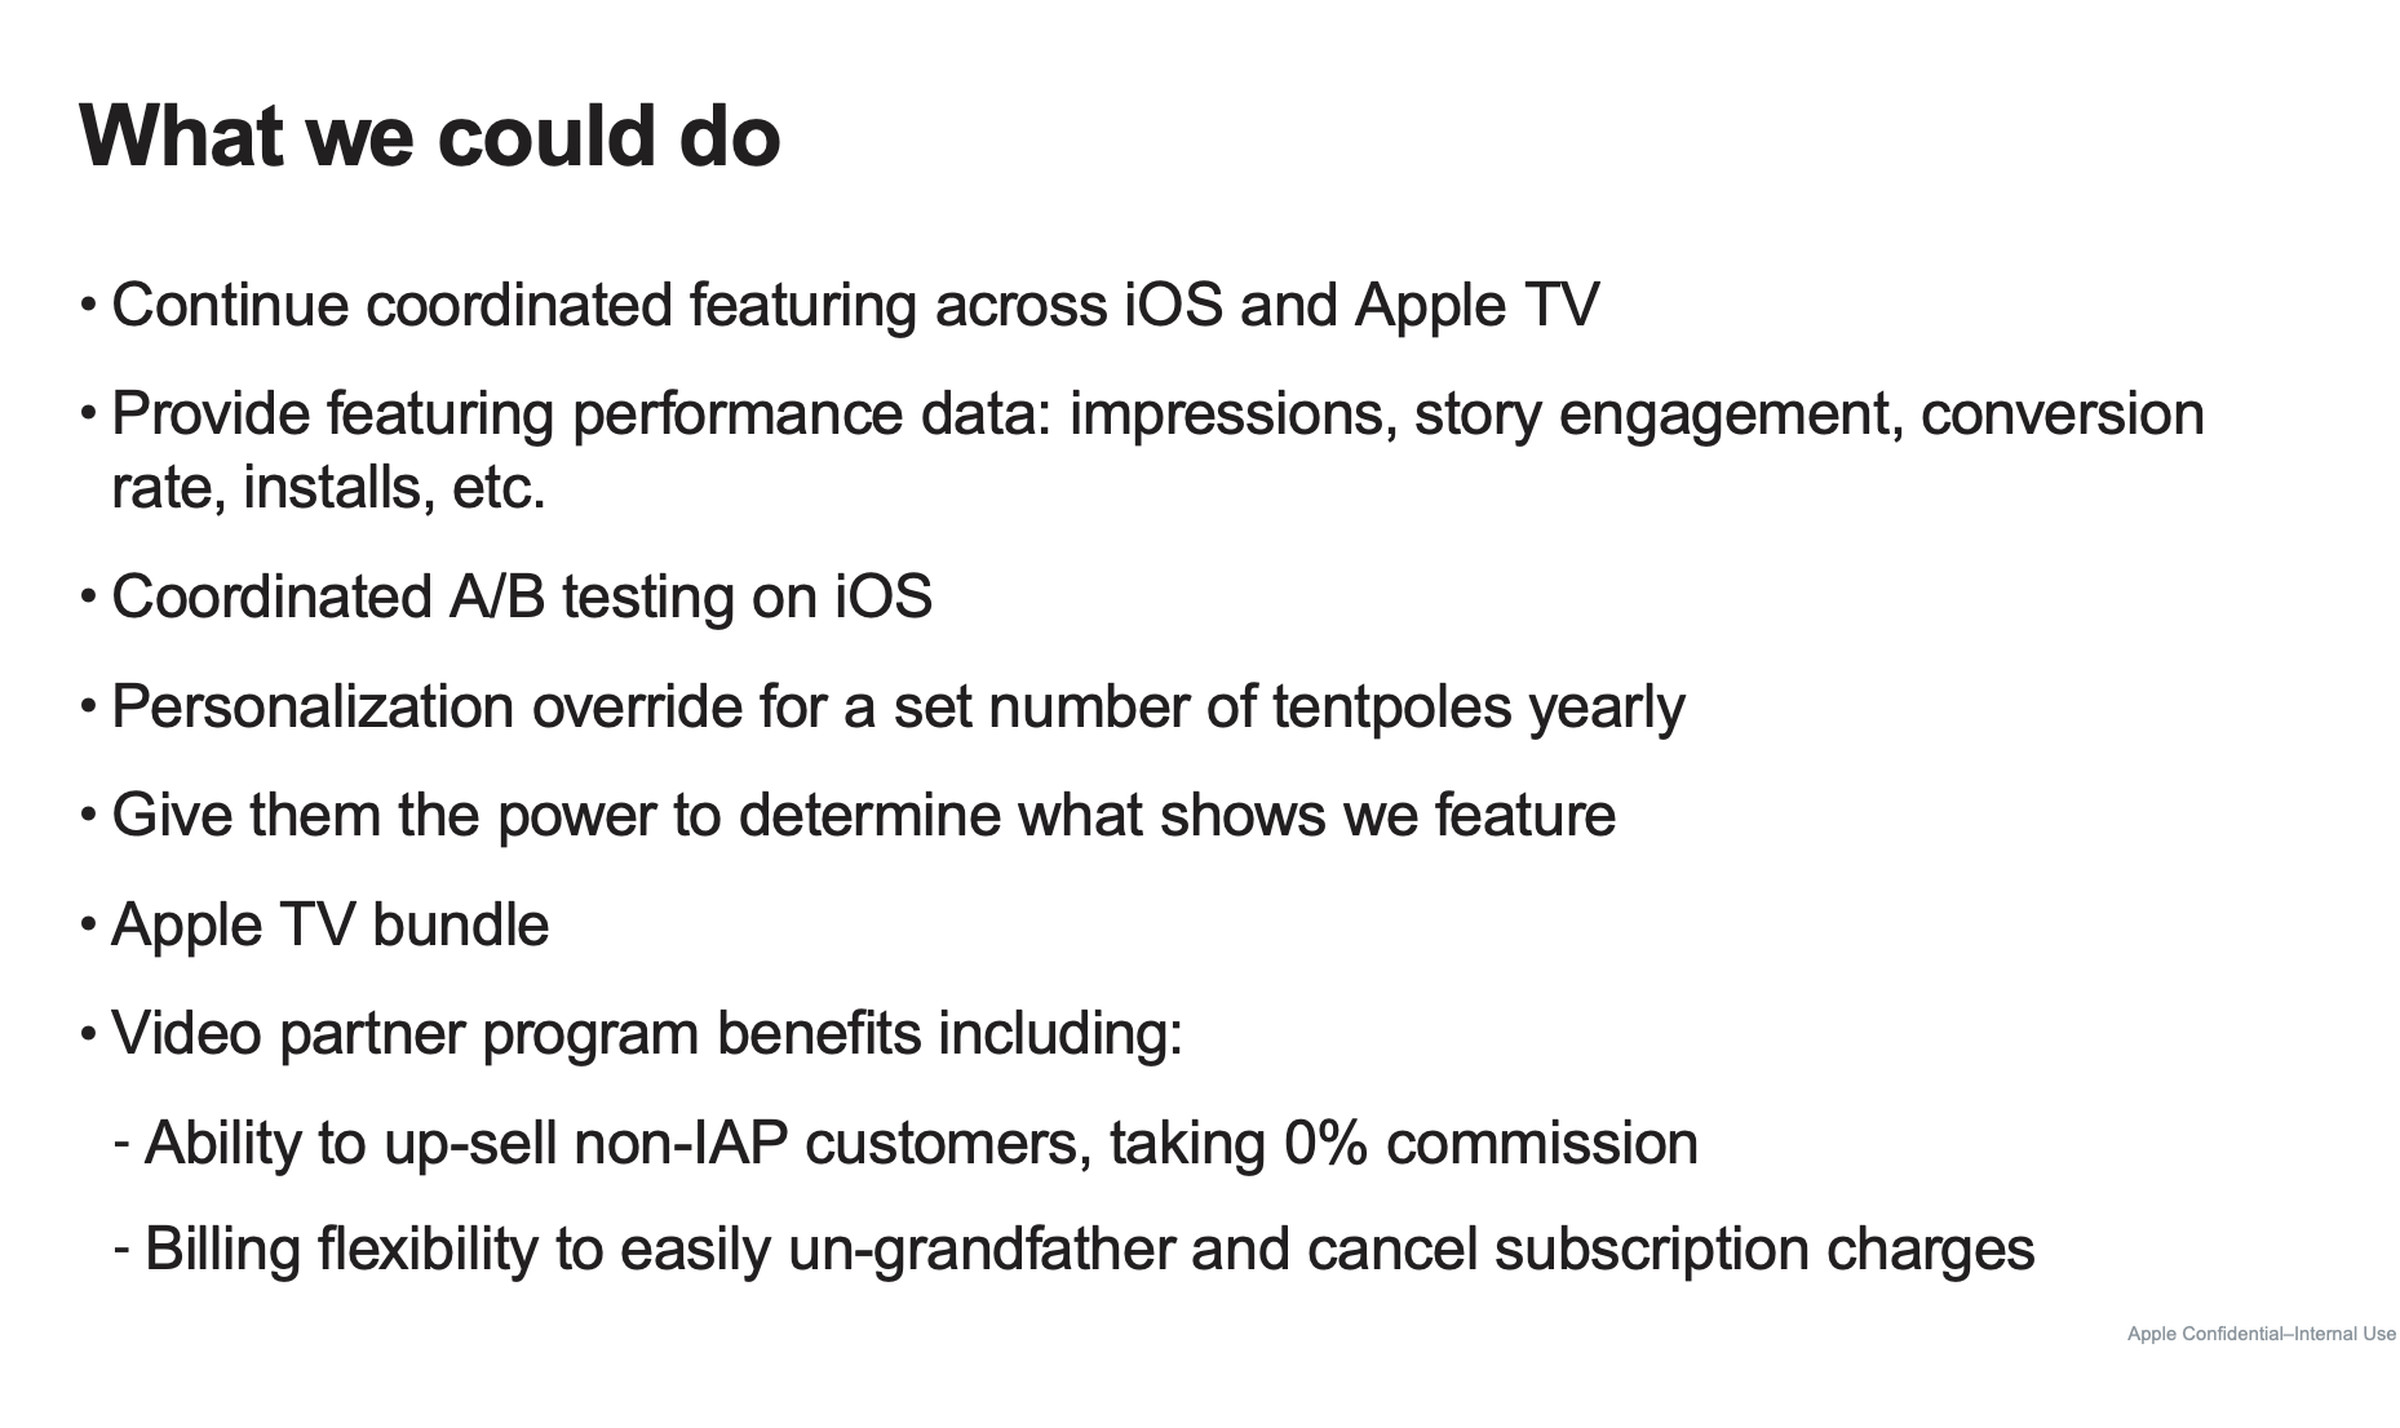 <em>Apple considered bundling Netflix with Apple TV sales and offering more flexibility with subscriptions.</em>